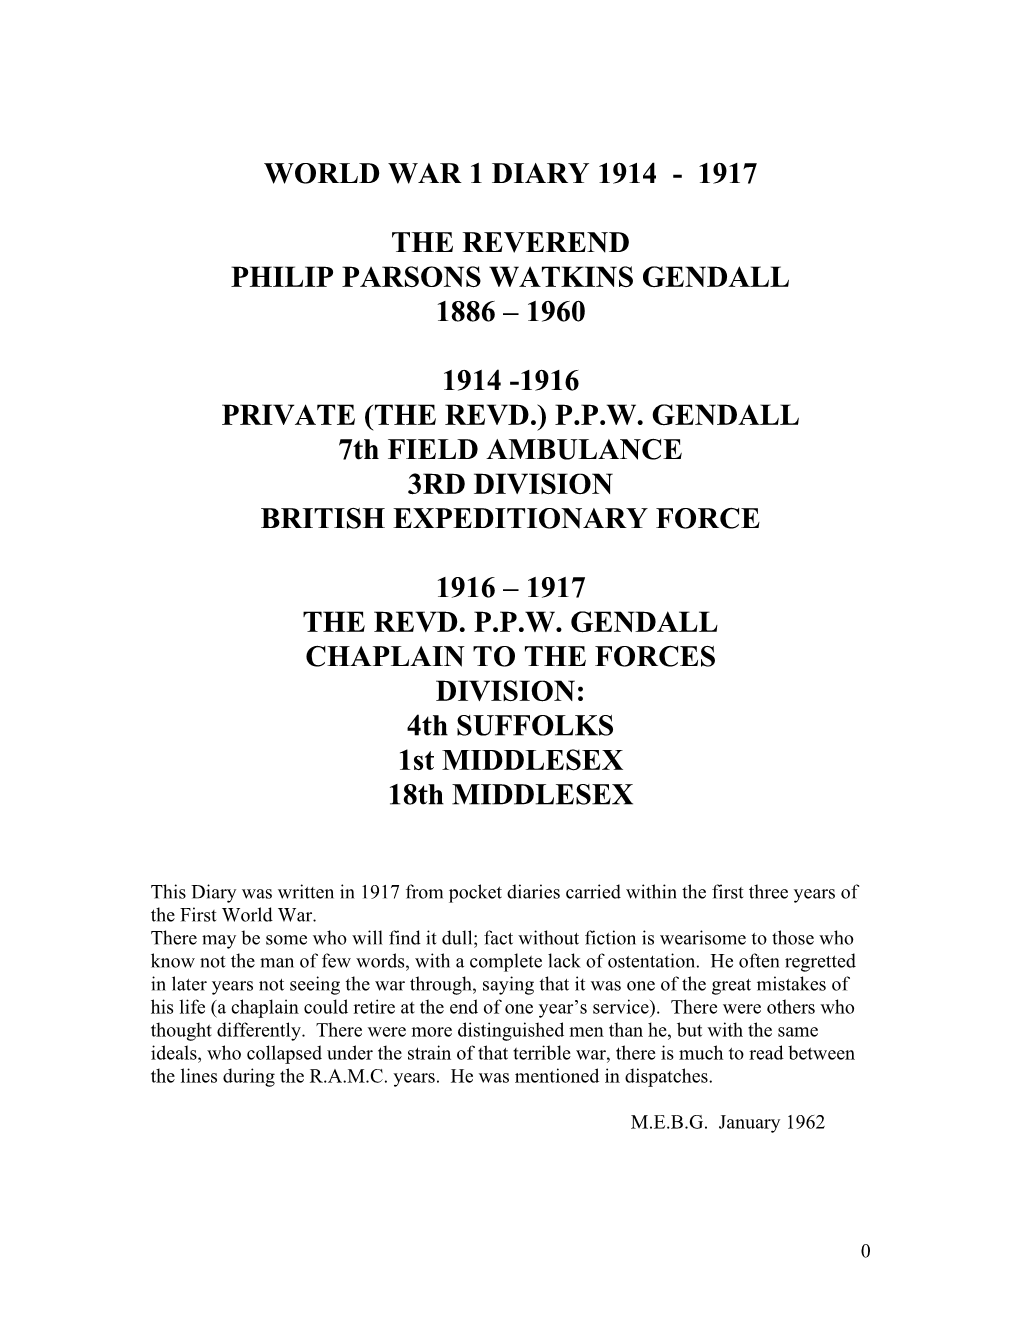 World War 1 Diary of the Reverend Philip Gendall